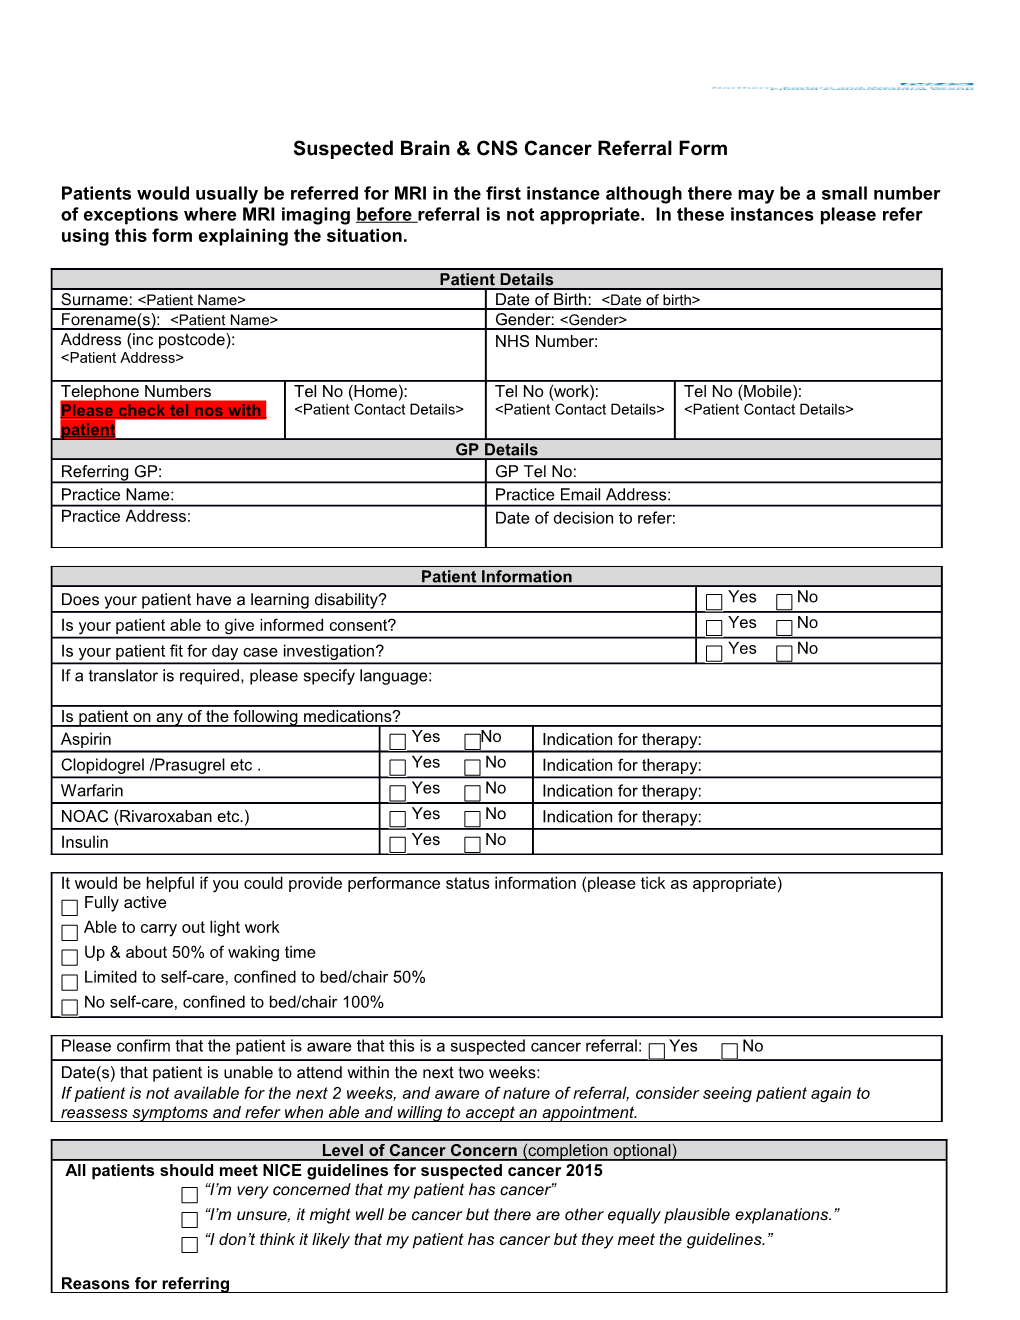 Suspected Brain & CNS Cancer Referral Form